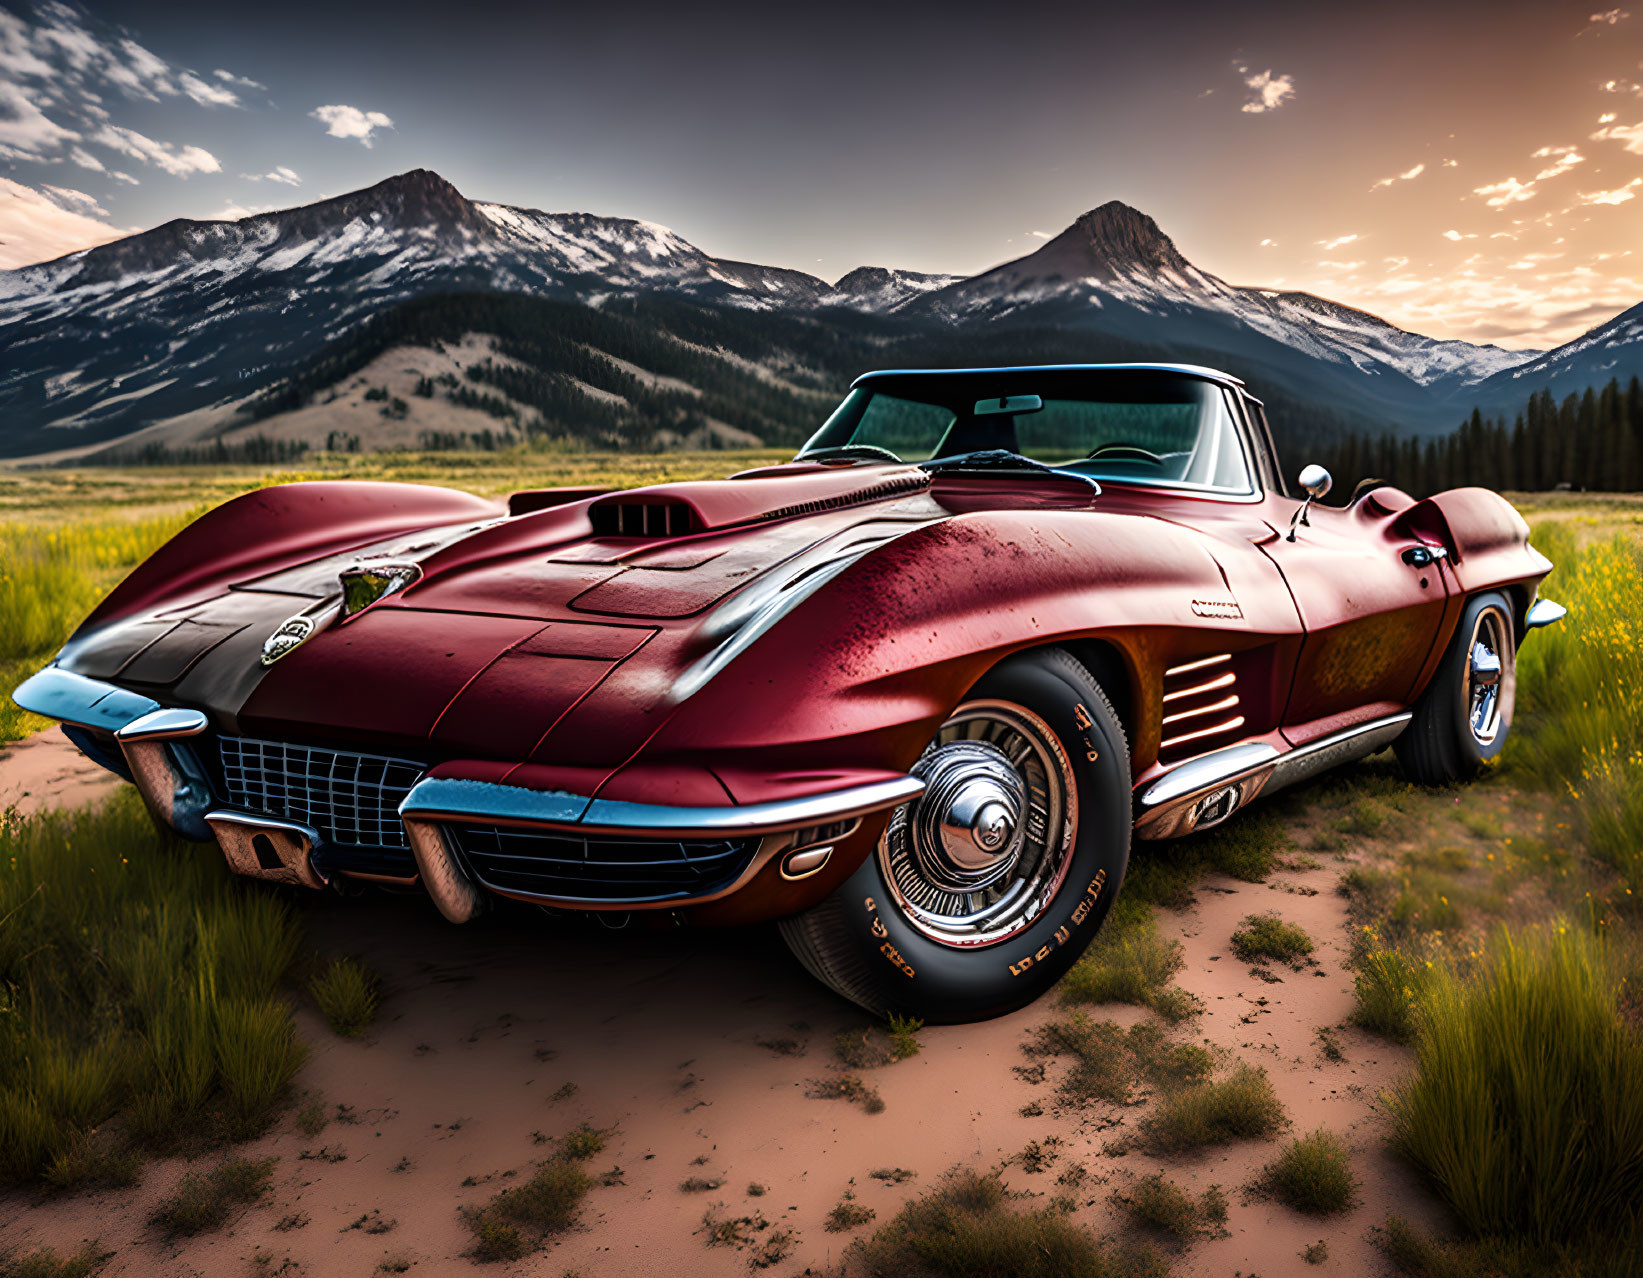 Red Corvette Convertible in Scenic Field with Sunset Sky